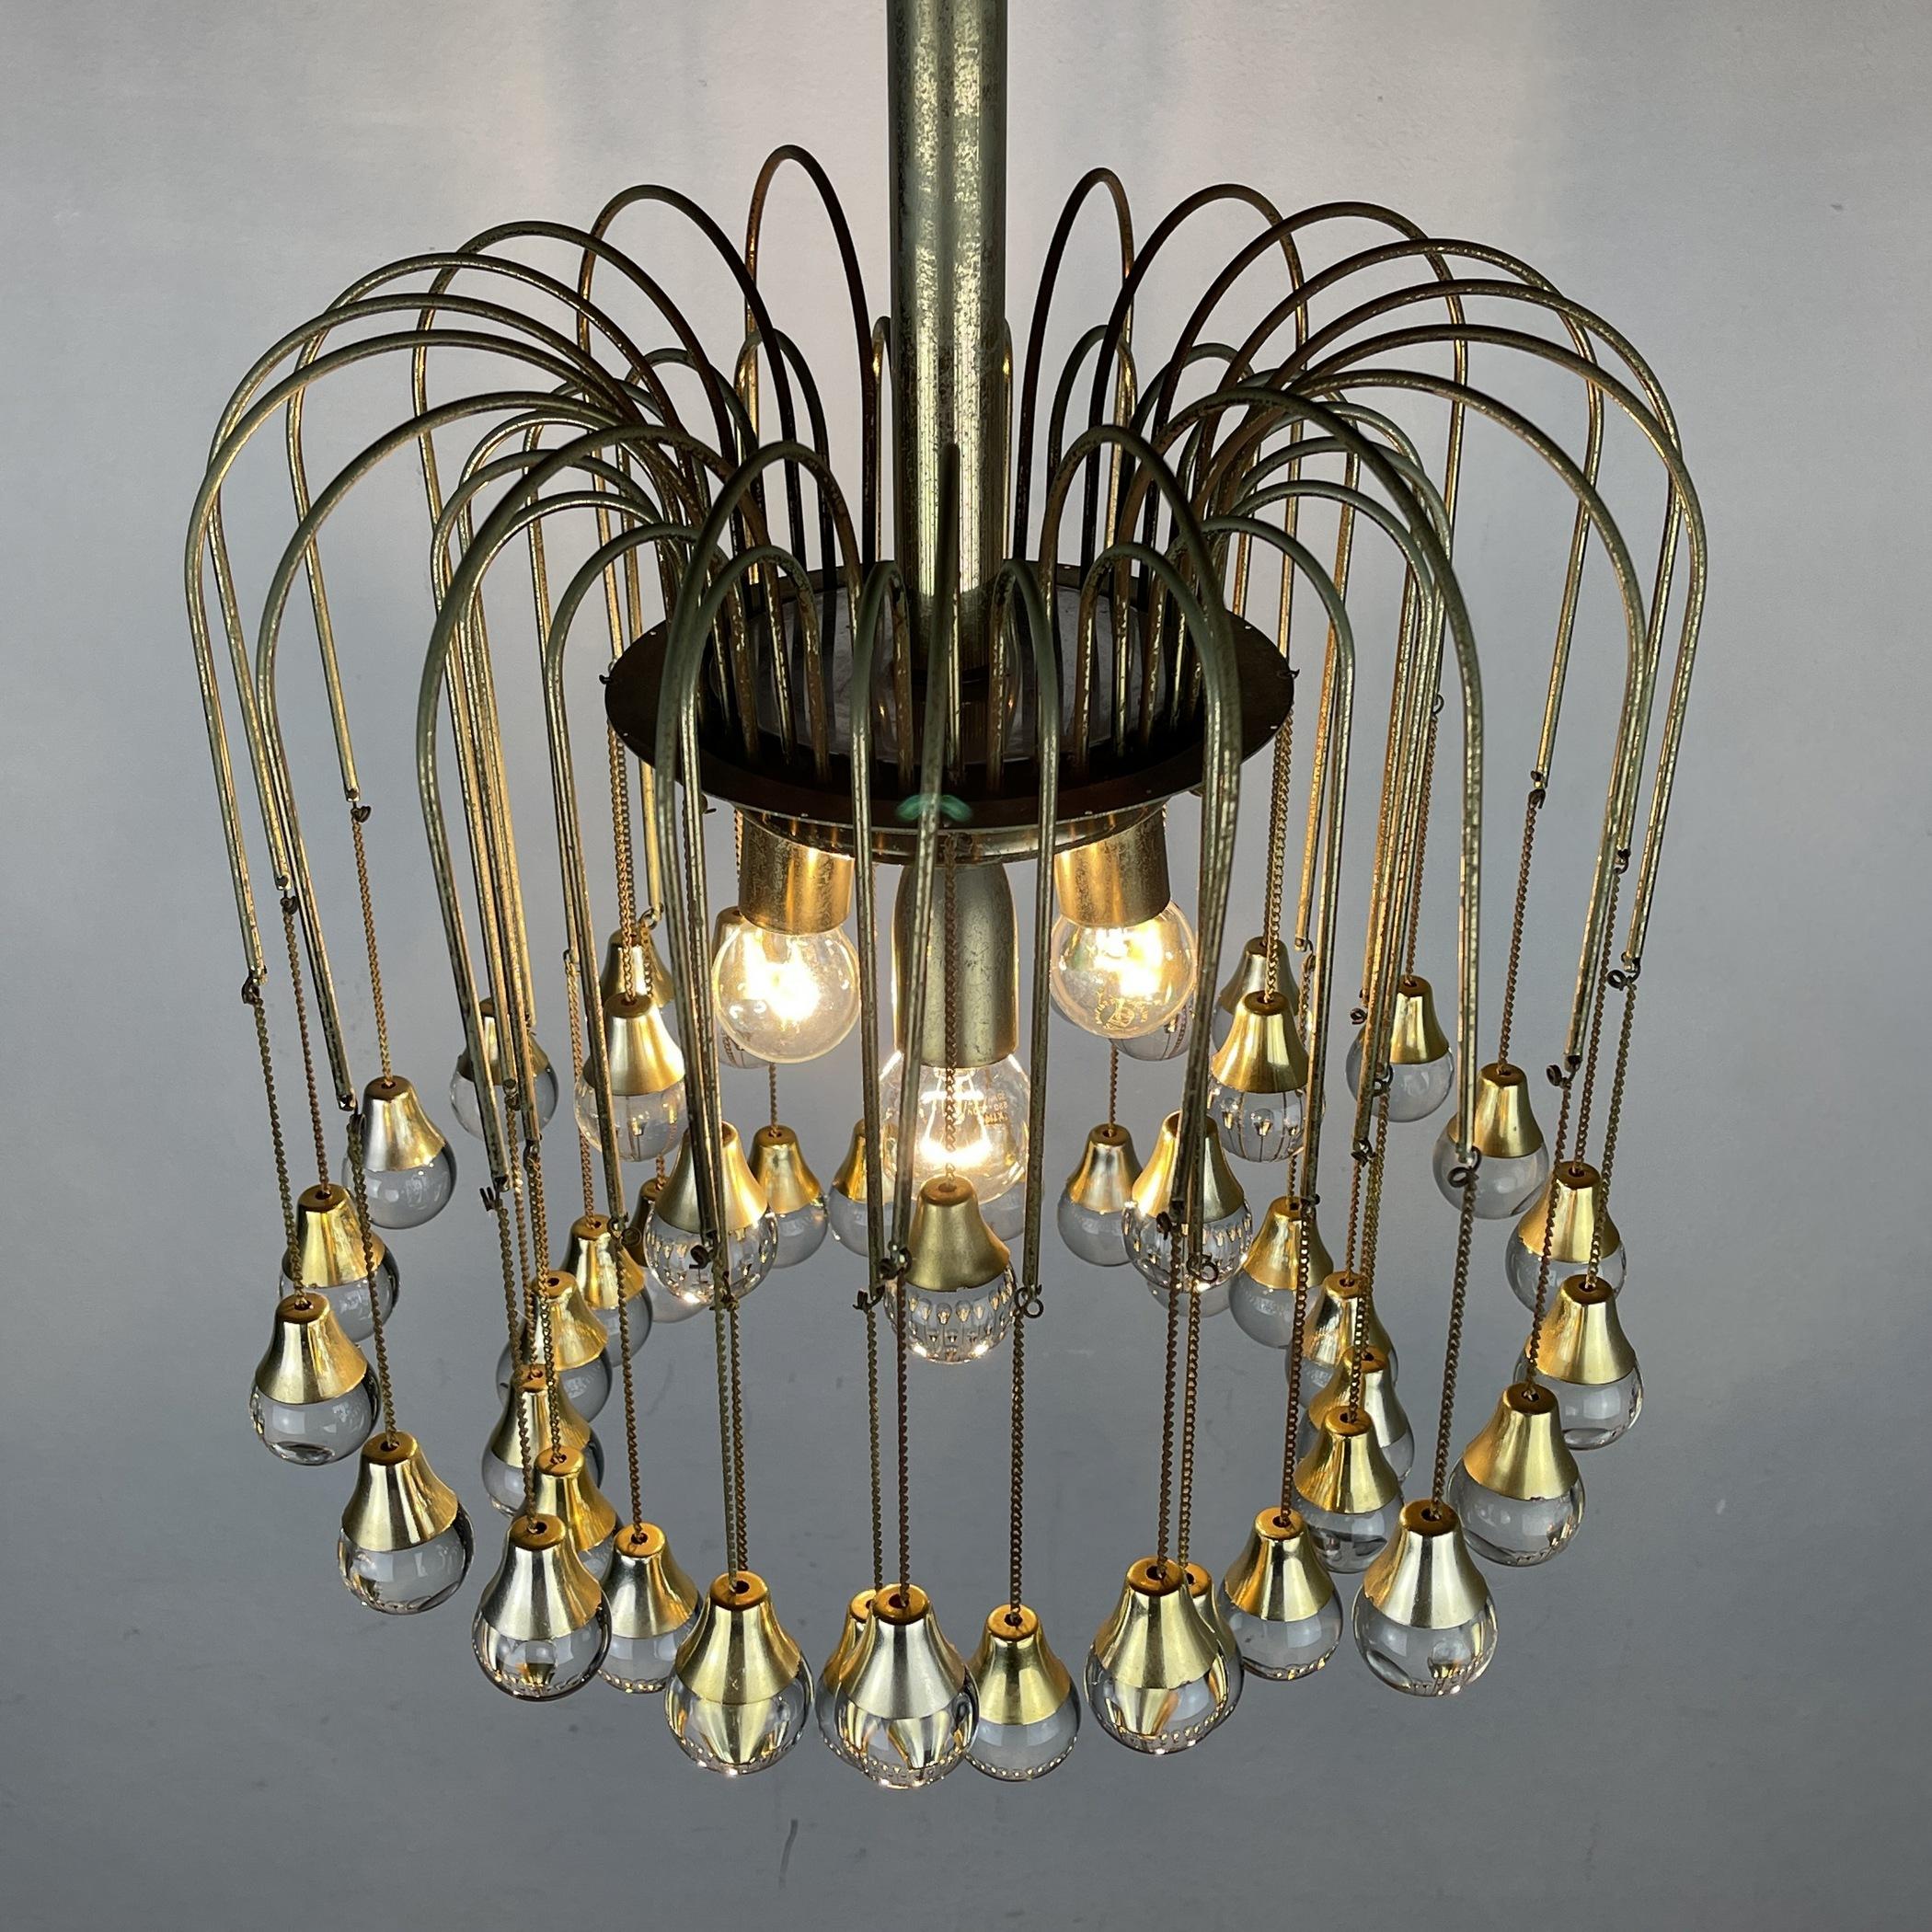 Vintage Cascade Glass Chandelier Italy 1960s Brass and 48 Glass Balls 8